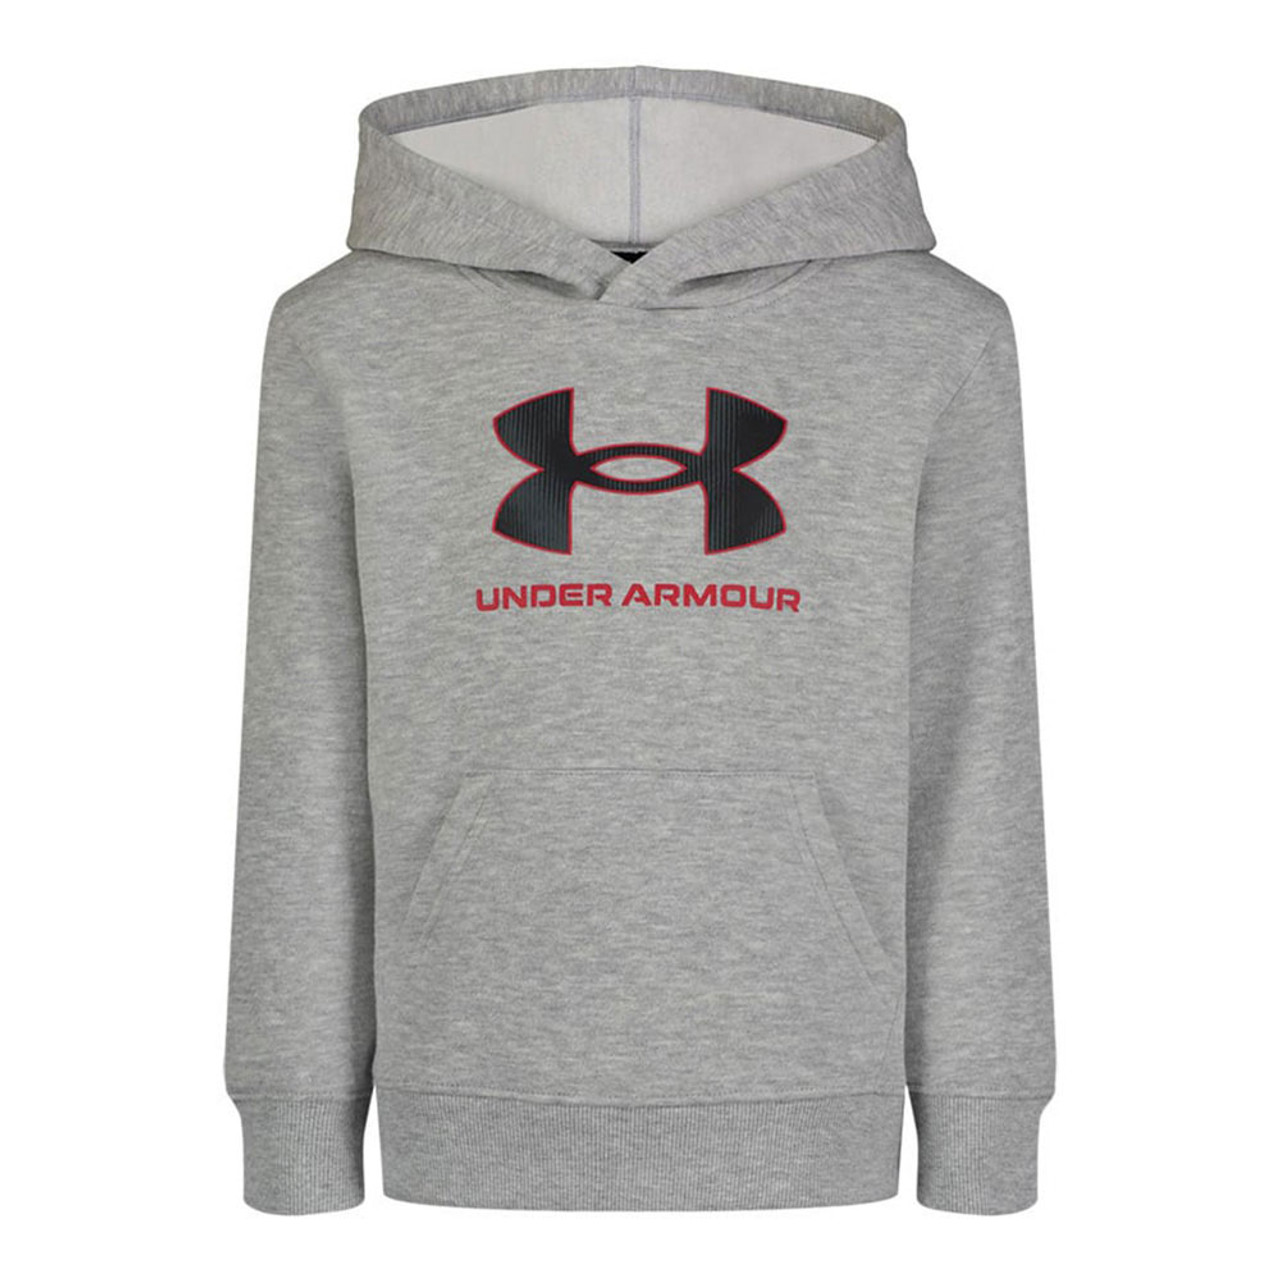 https://cdn11.bigcommerce.com/s-zut1msomd6/images/stencil/1280x1280/products/41407/244295/under-armour-kids-boys-valley-etch-hoody-25uafgb01e-052mgray-mod-gray-main__58348.1701708058.jpg?c=1